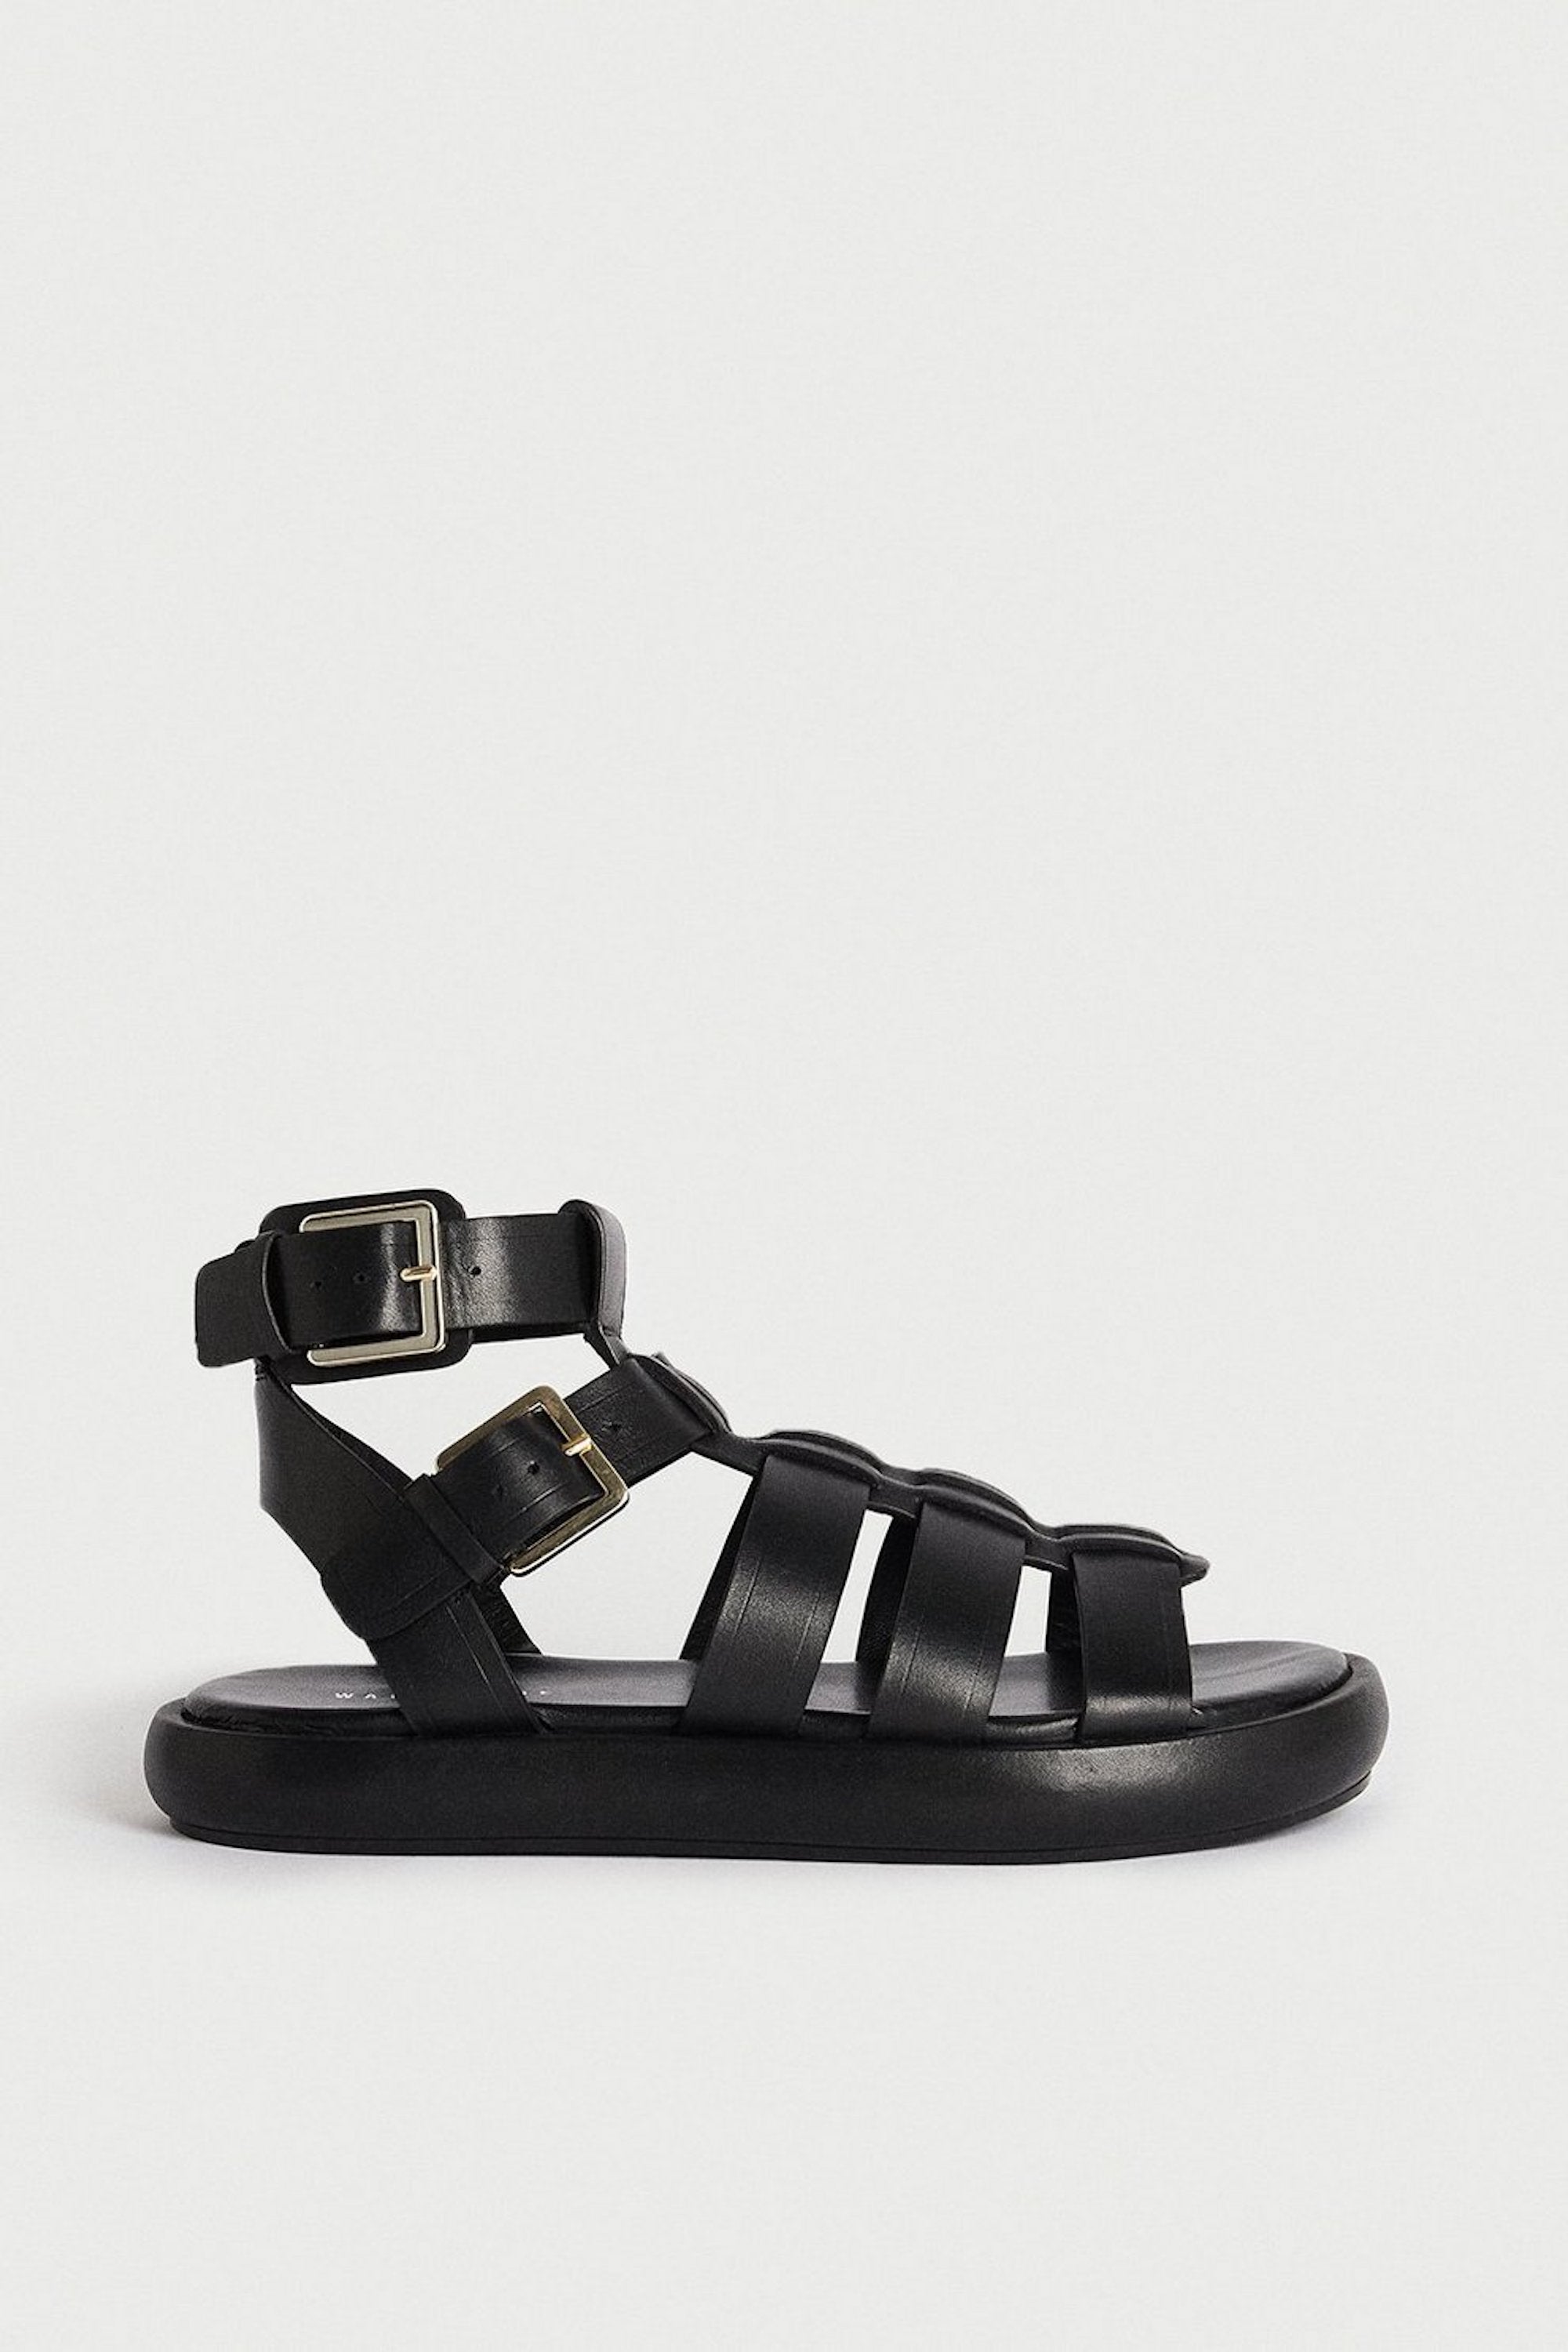 Warehouse + Real Leather Double Buckle Gladiator Sandal